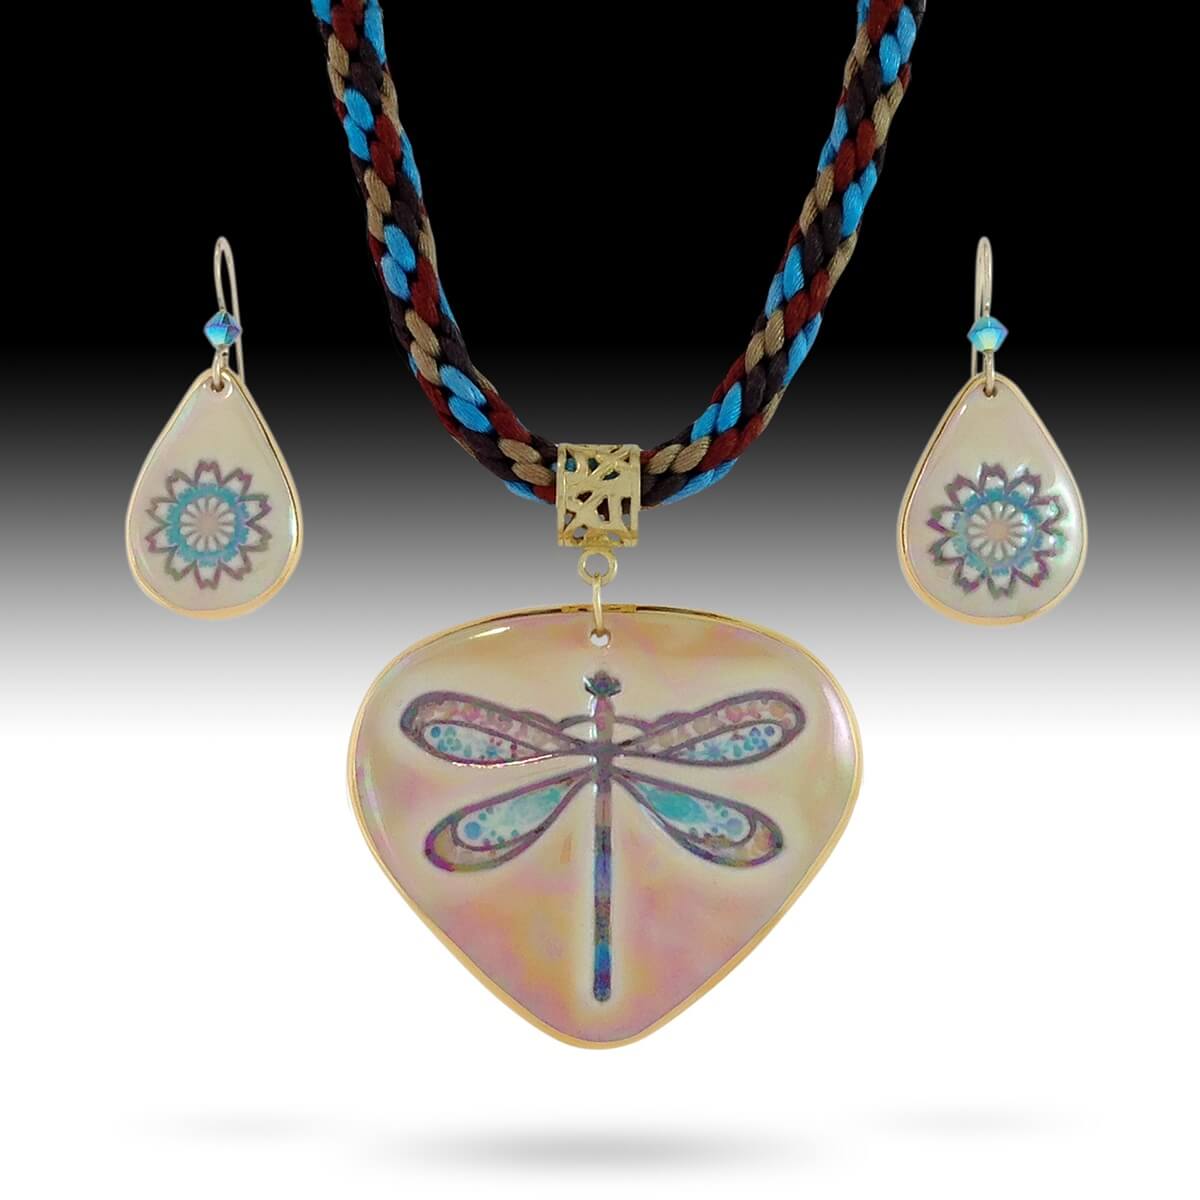 Large dragonfly pendant displayed on a Kumihimo braided necklace with coordination flower earrings in our southwest color palette